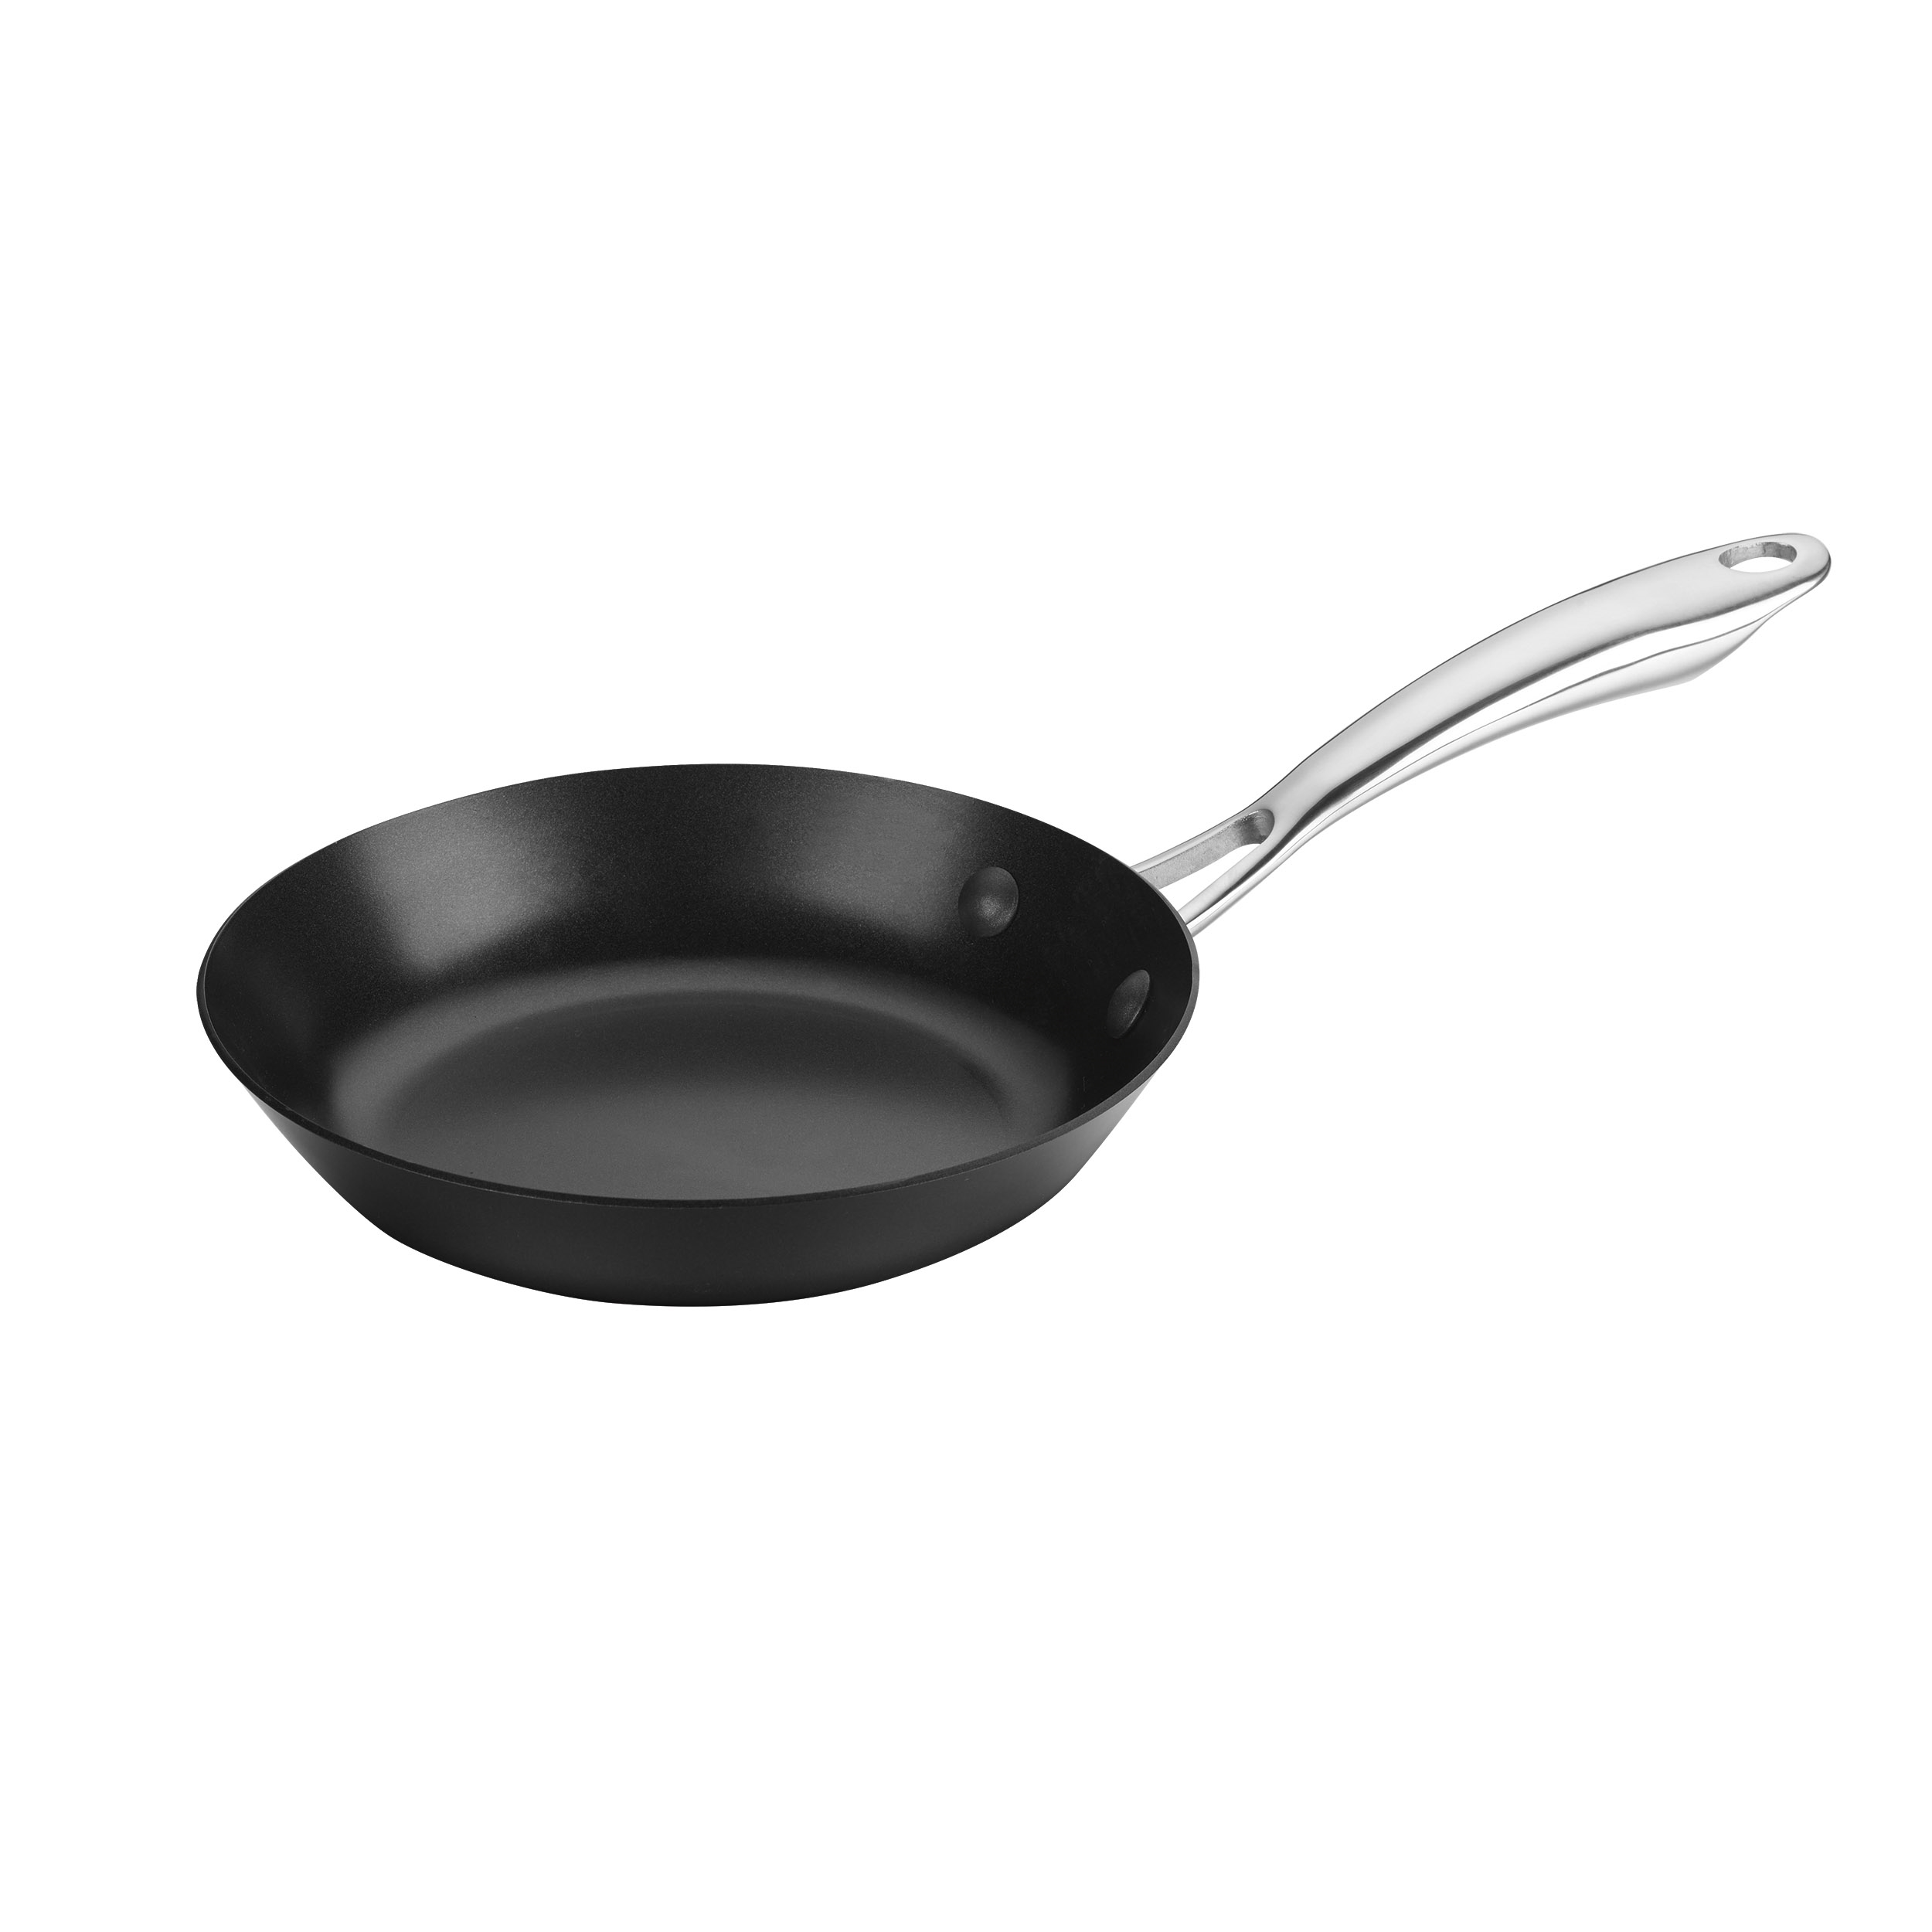 Discontinued Carbonware 8" Carbon Steel Fry Pan Cast Iron 12" Fryer